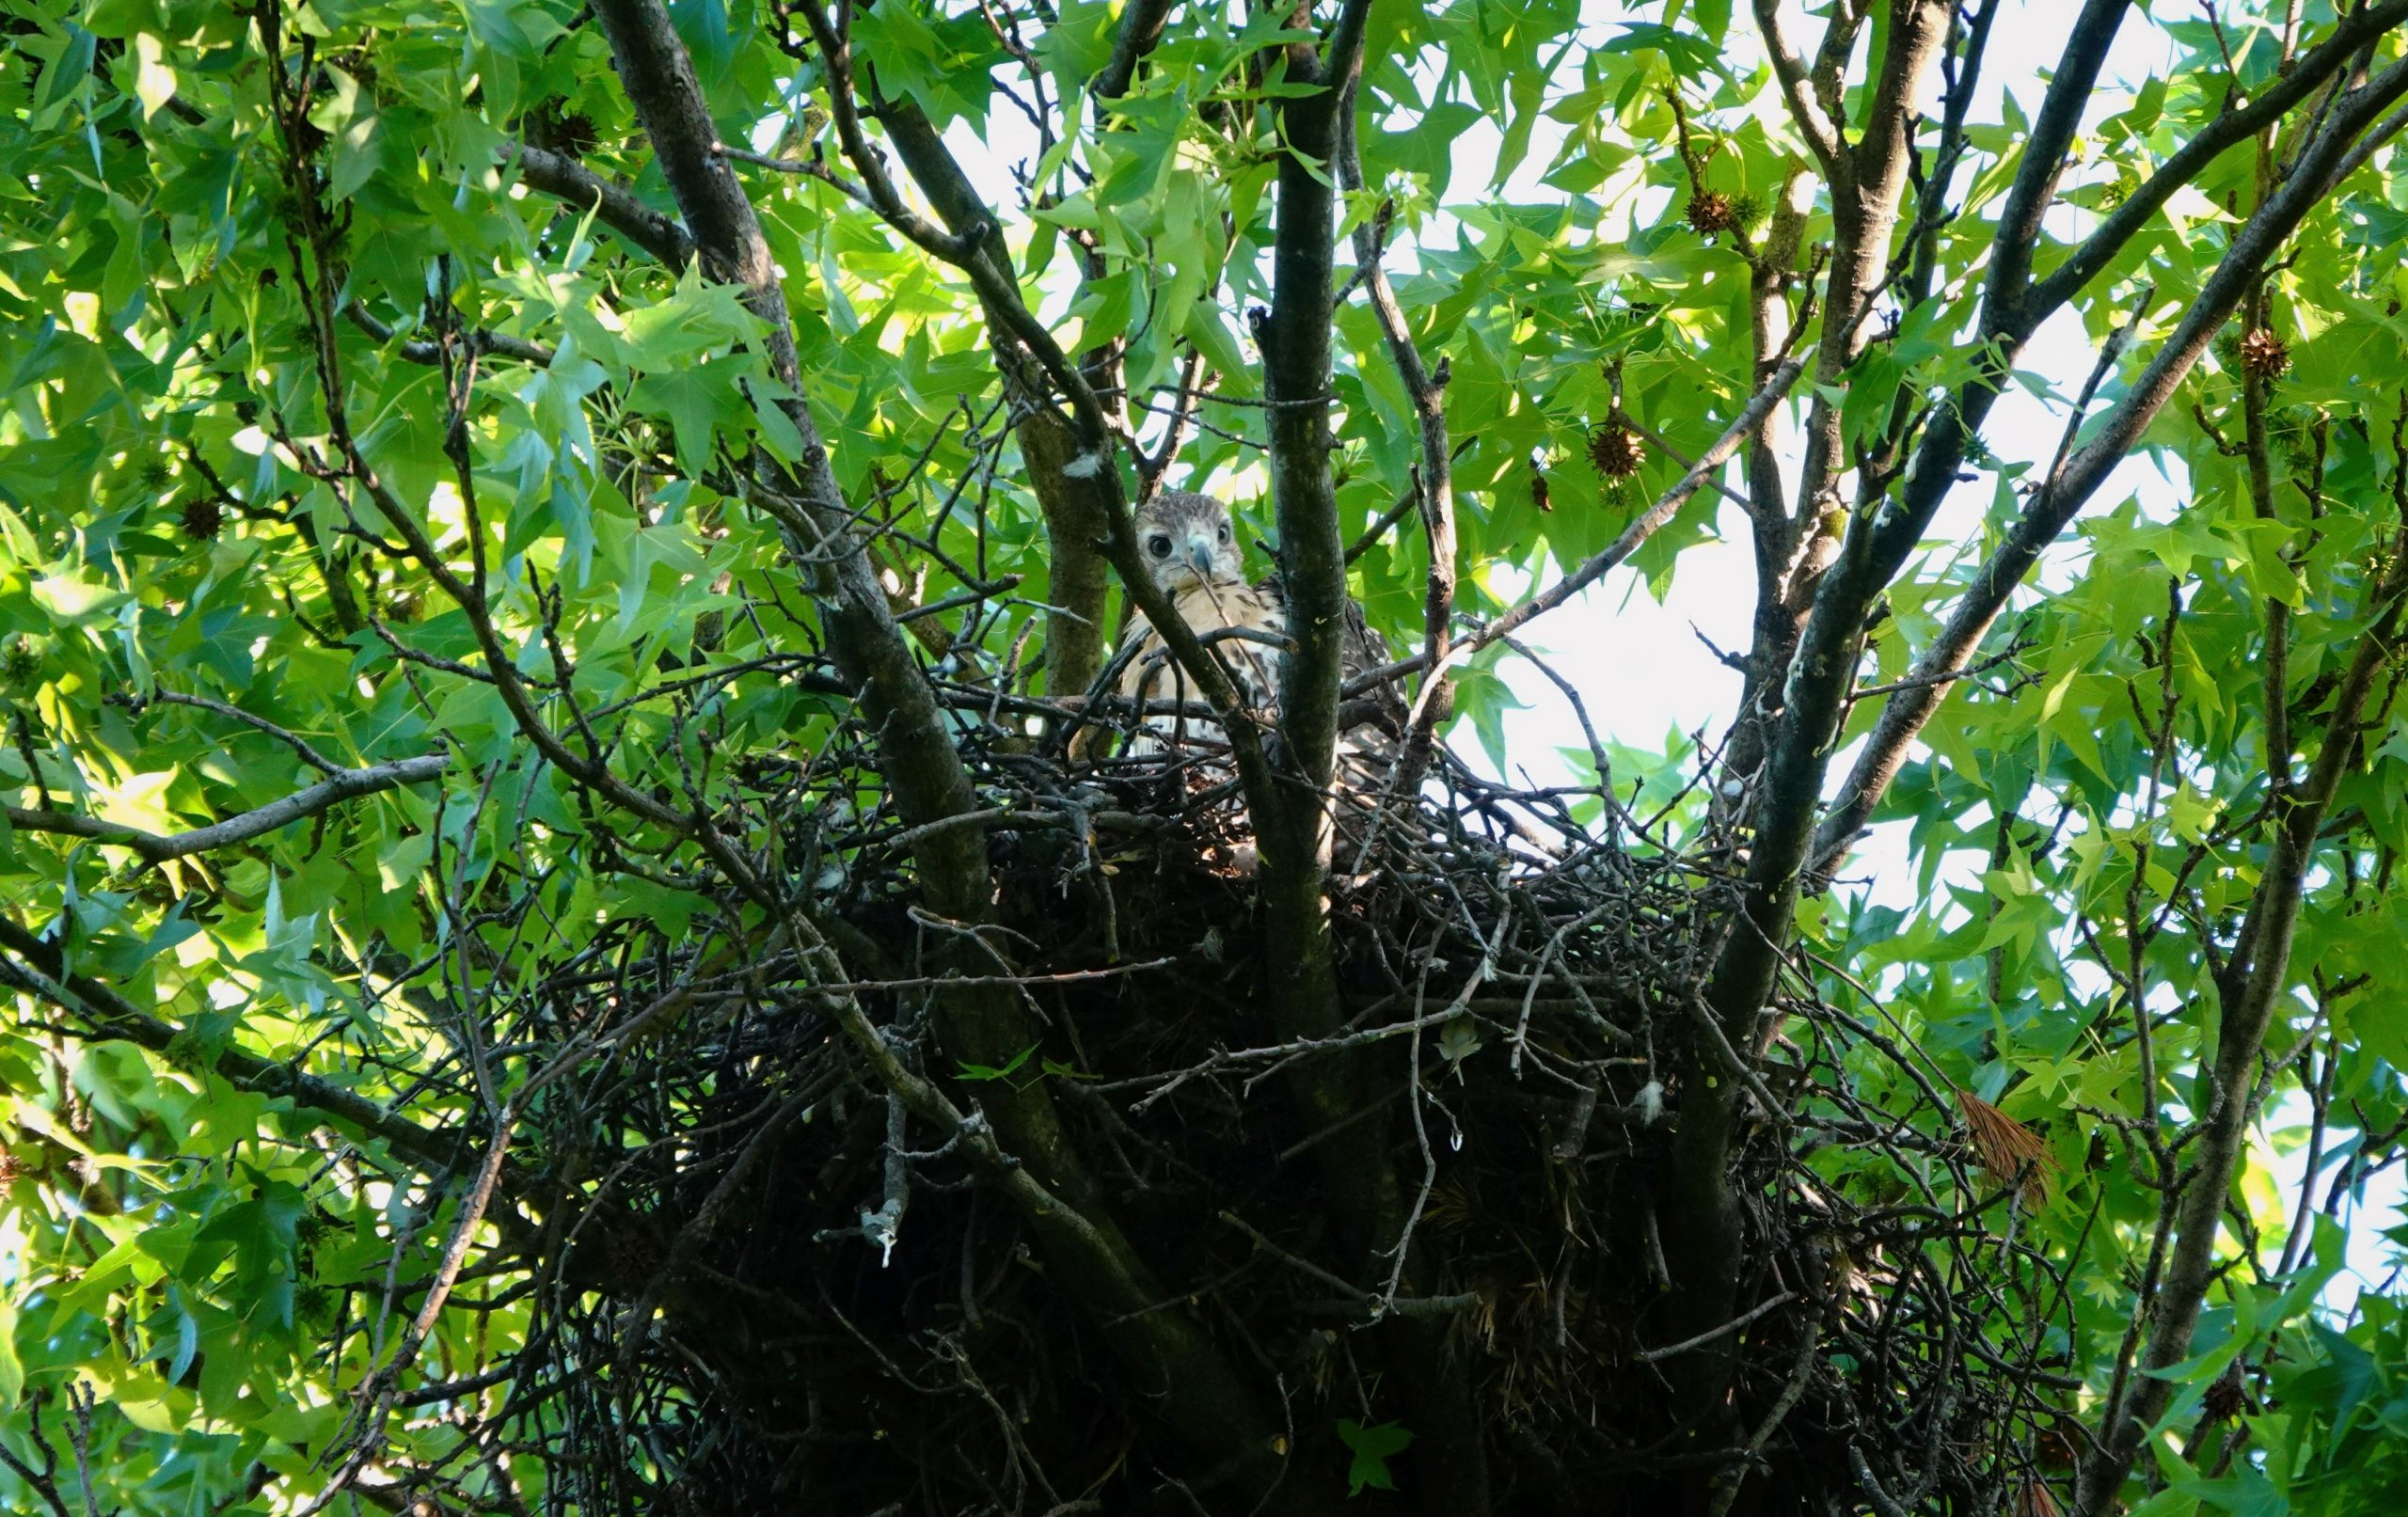 A fledgling hawk looks down from a nest high among the branches of a green summer tree